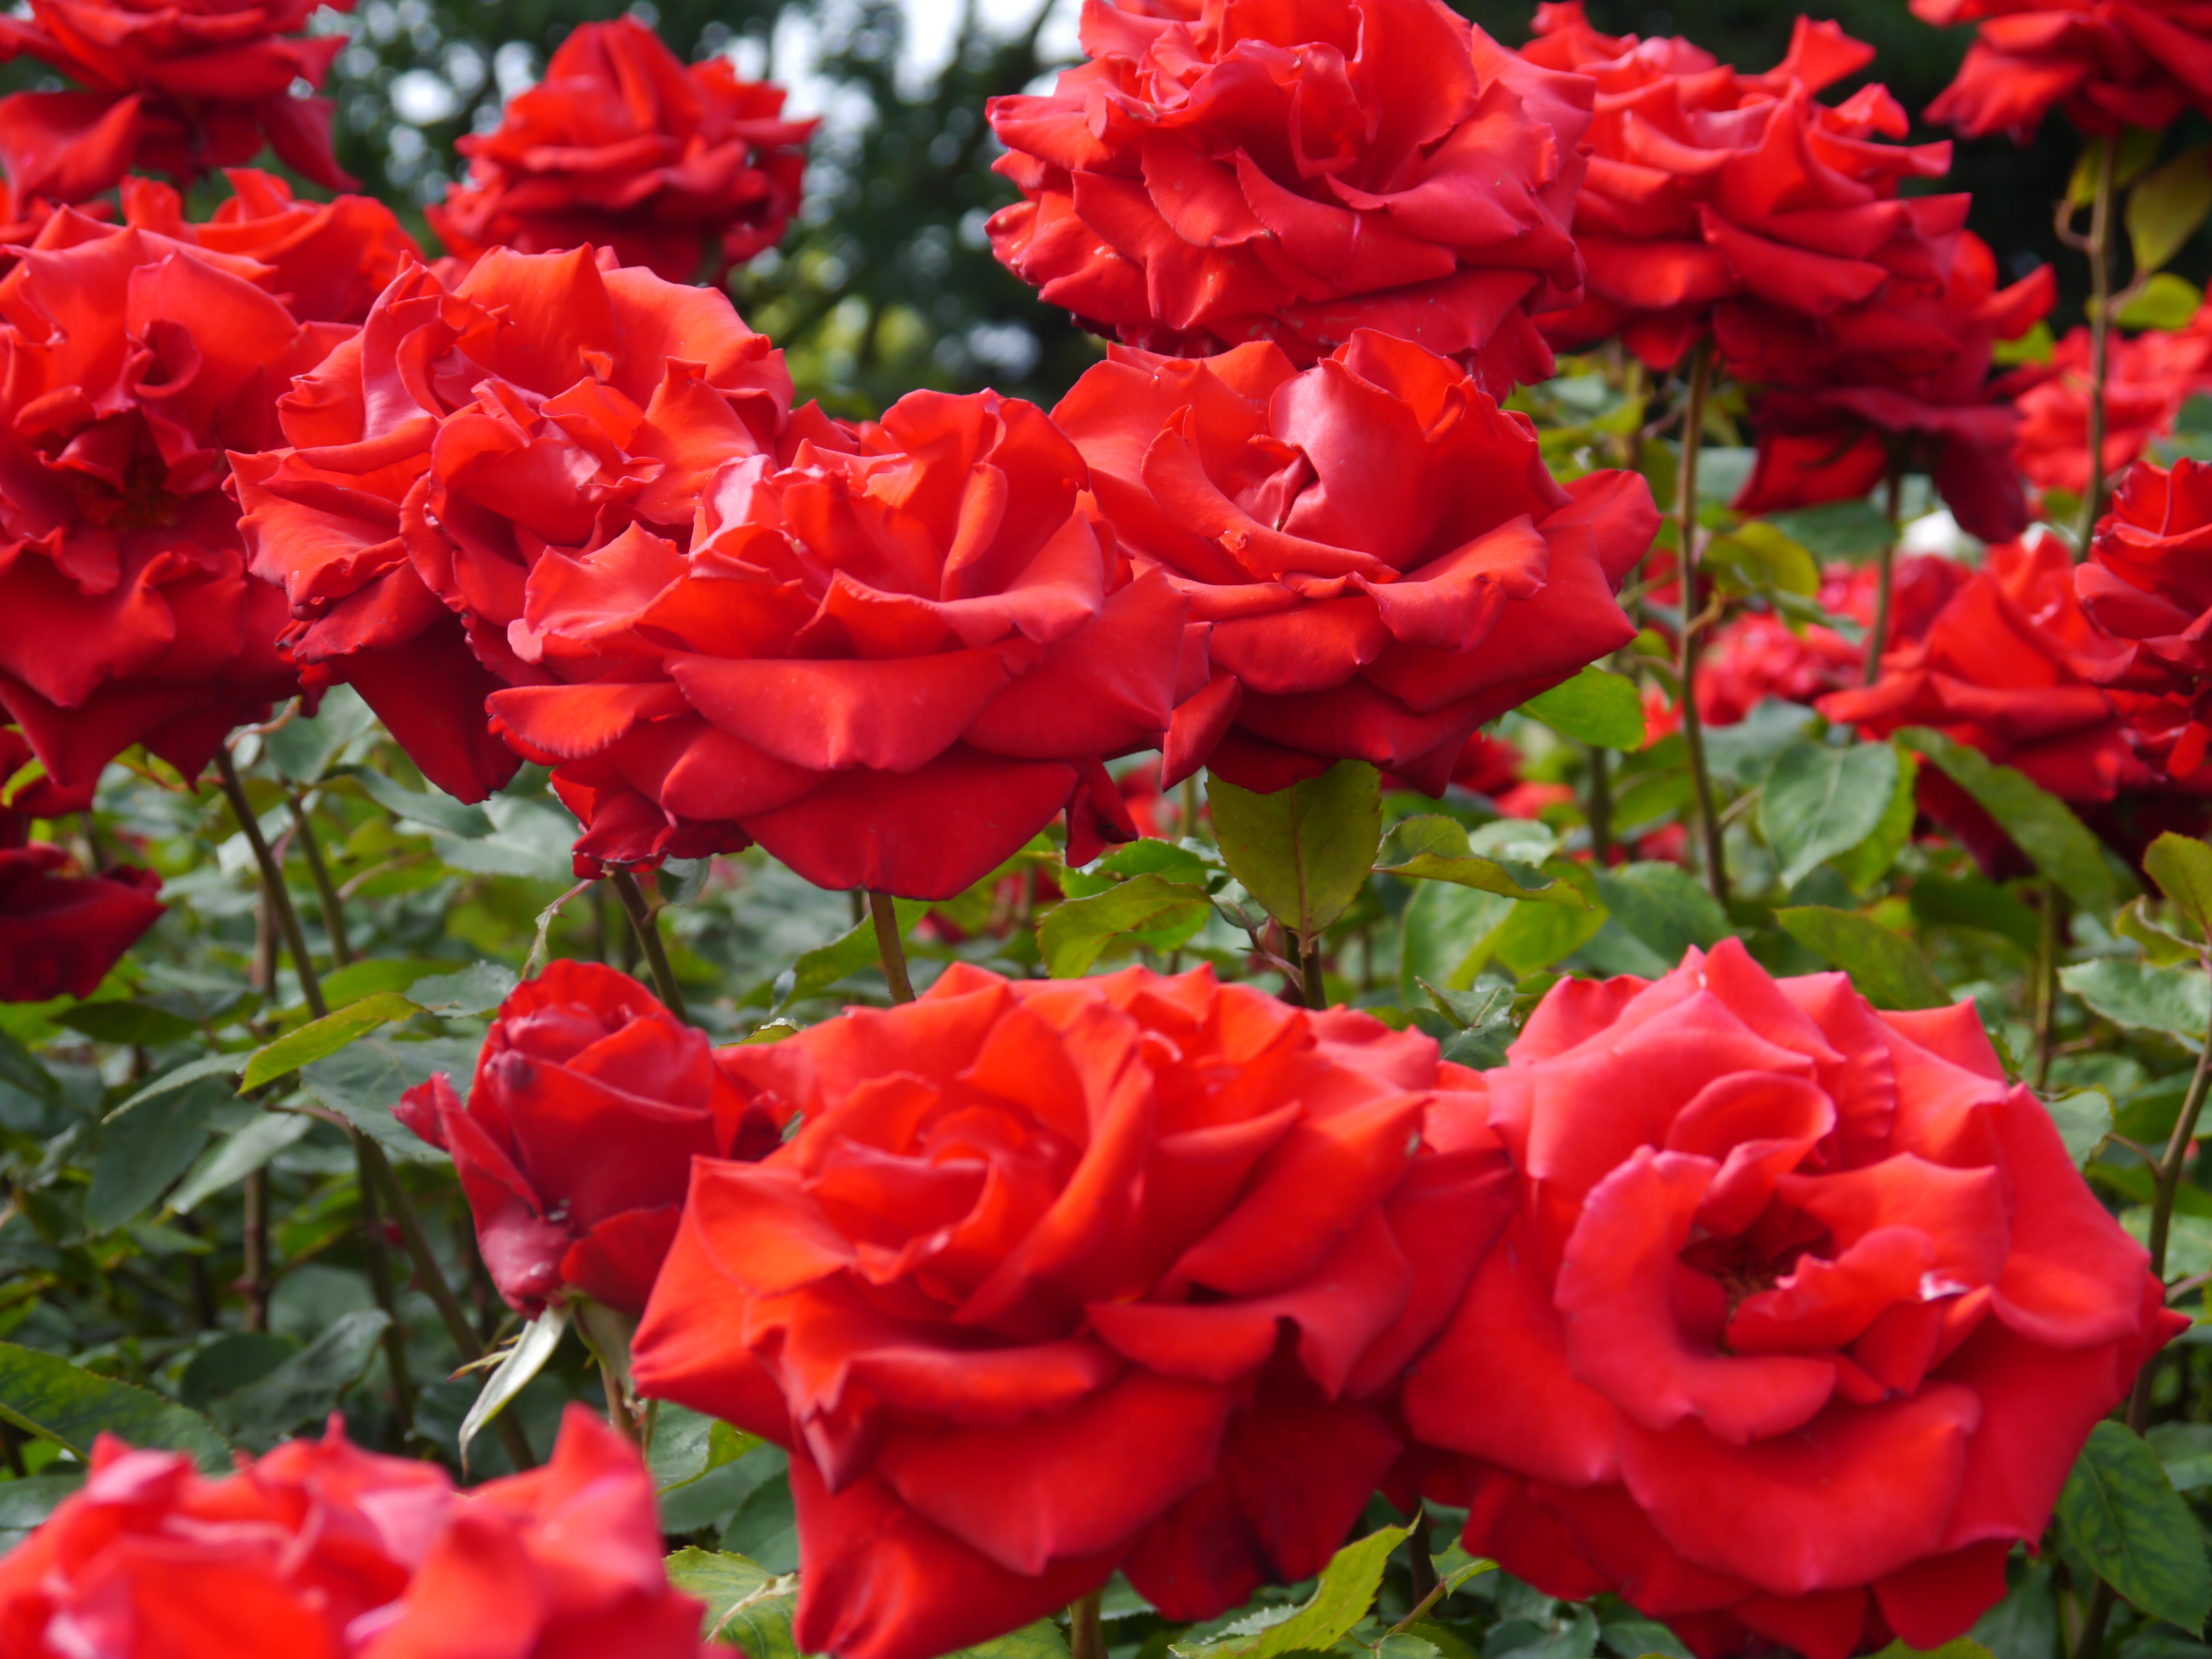 National Red Rose Day - June 12